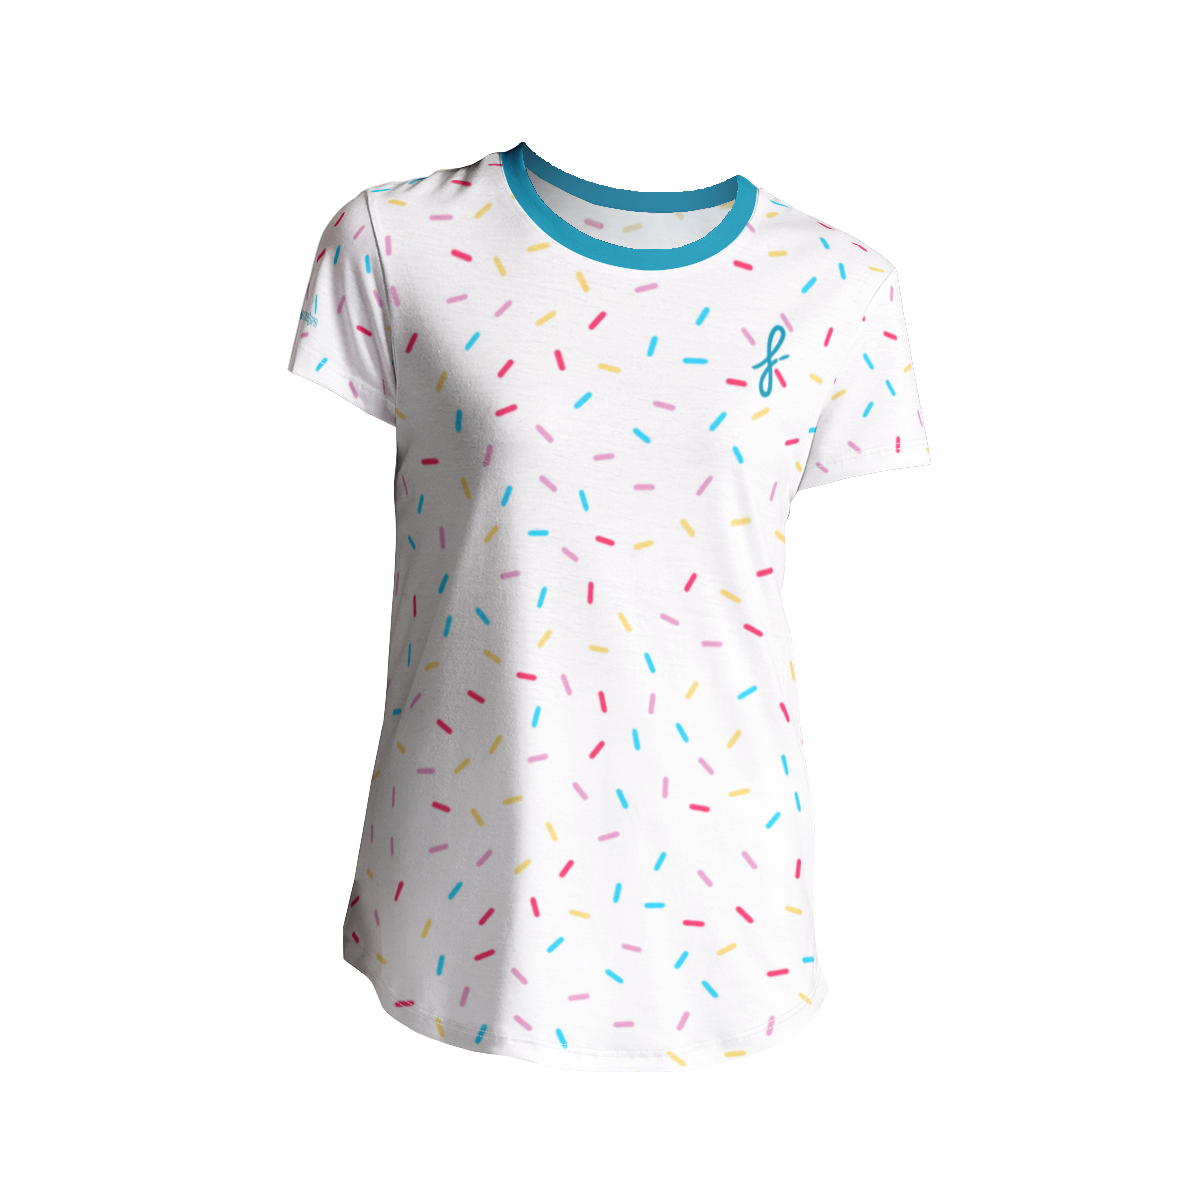 Donut Women's SolPro Jersey